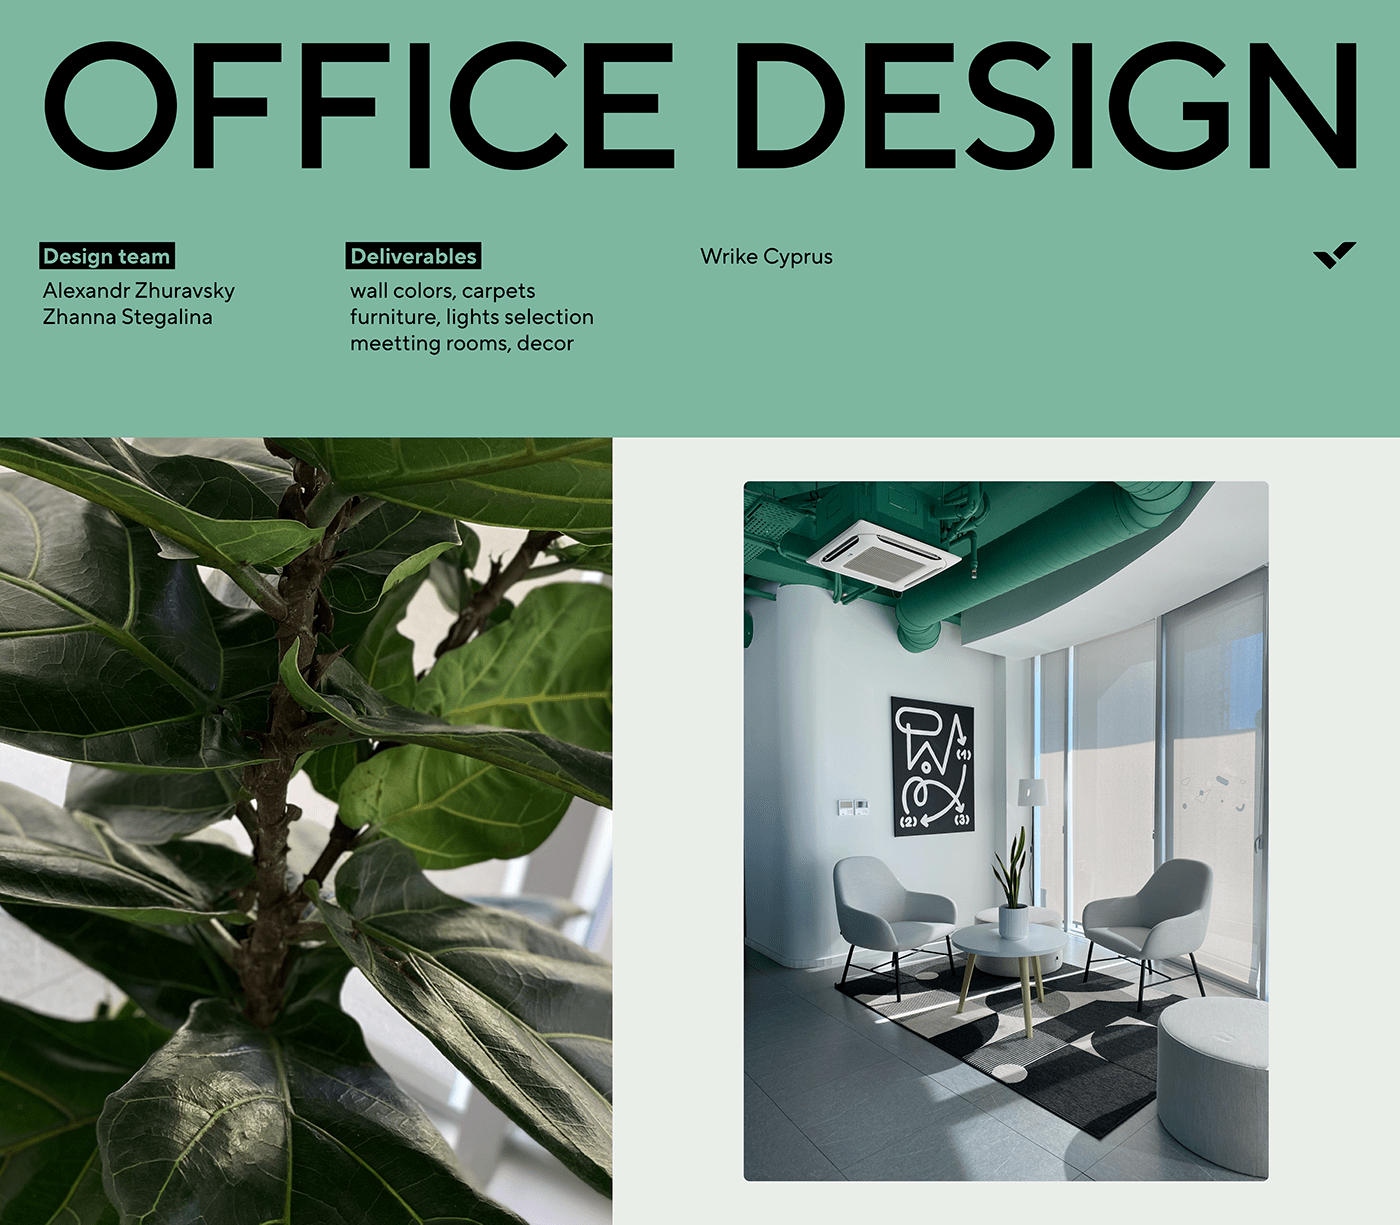 Office design for Wrike Cyprus on Behance